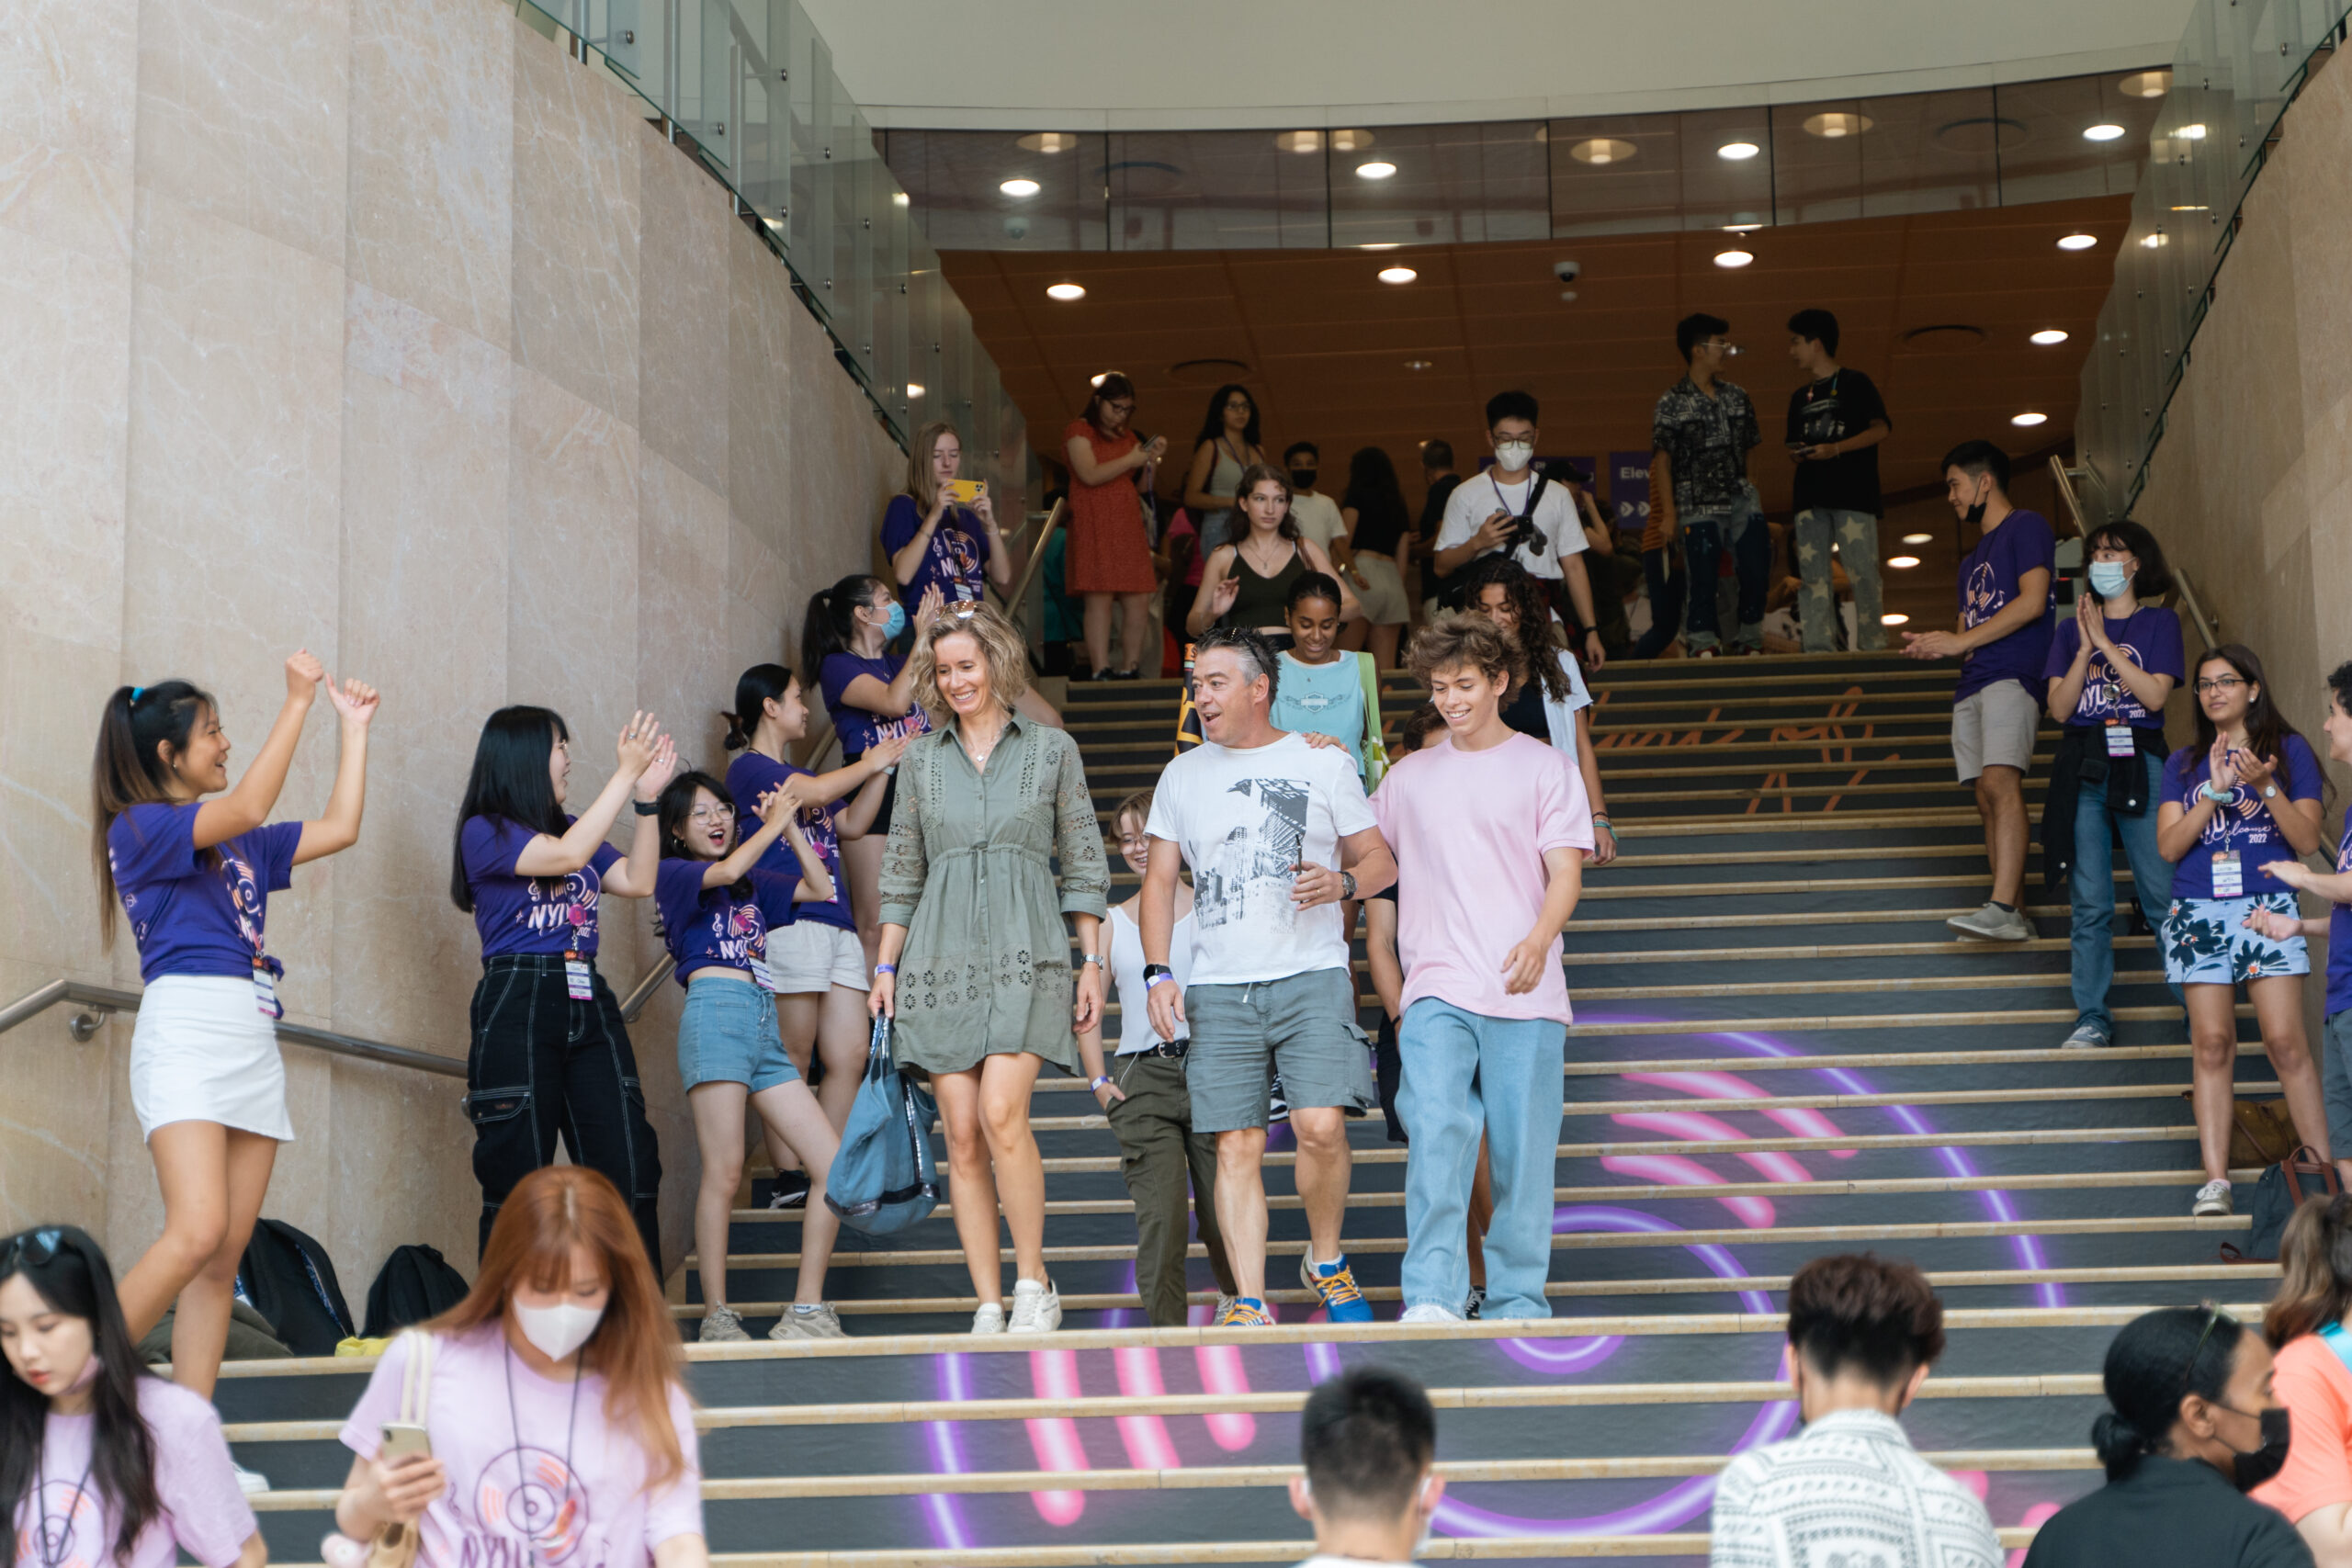 Parents descending the stairs at the NYU Kimmel Center for University Life during move-in weekend.